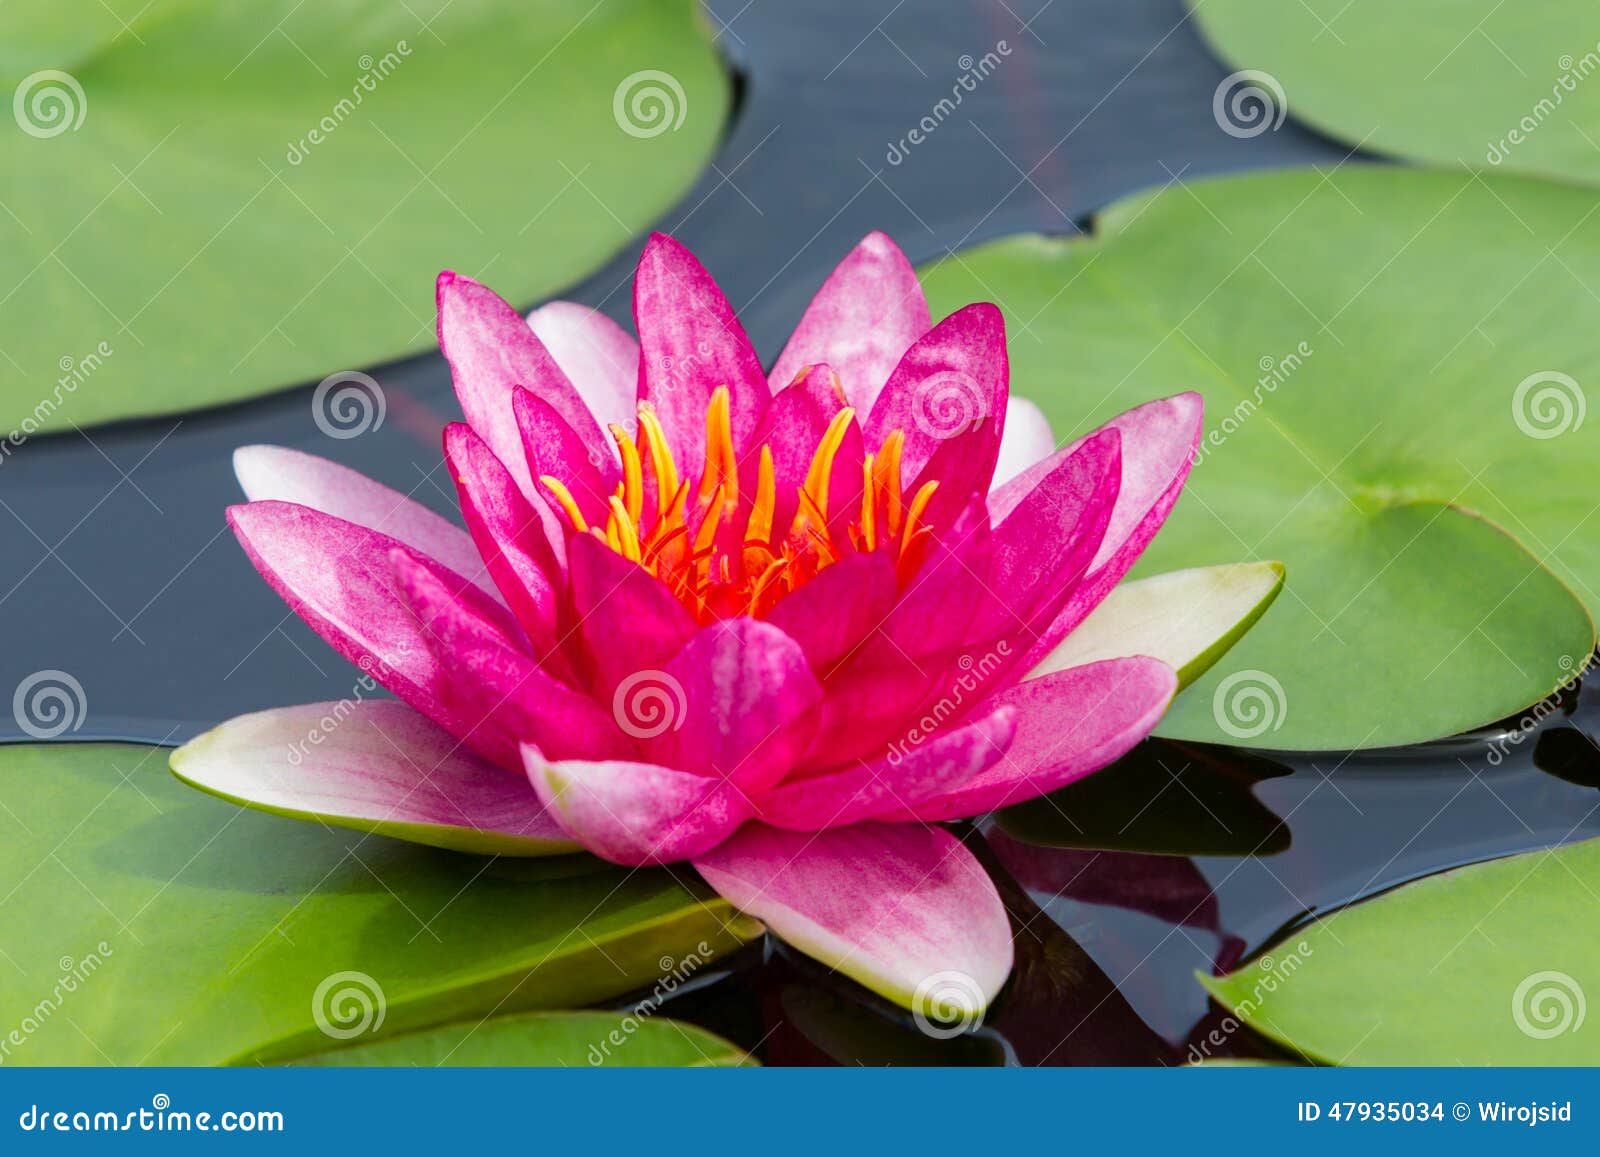 colorful pink water lilly (yuh ling)